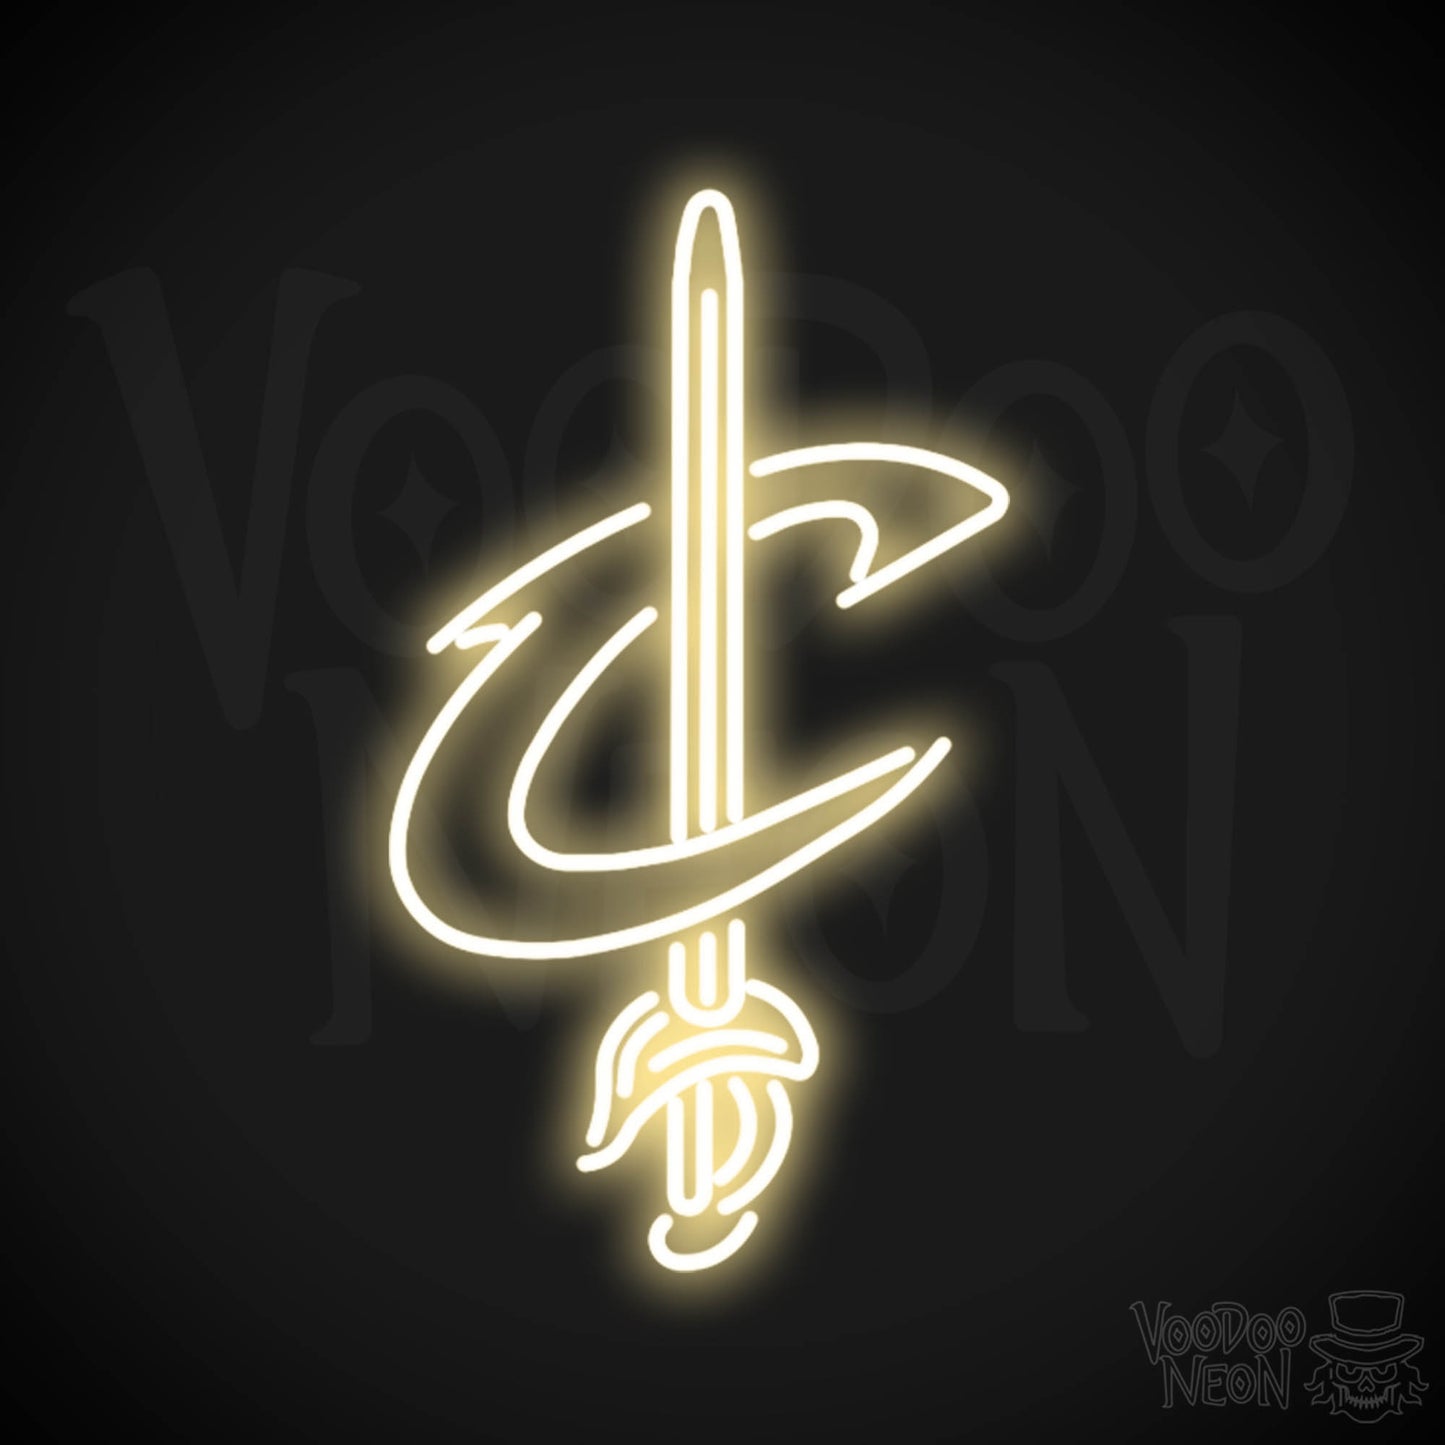 Cleveland Cavaliers Neon Sign - Cleveland Cavaliers Sign - Neon Cavaliers Wall Art - Color Warm White